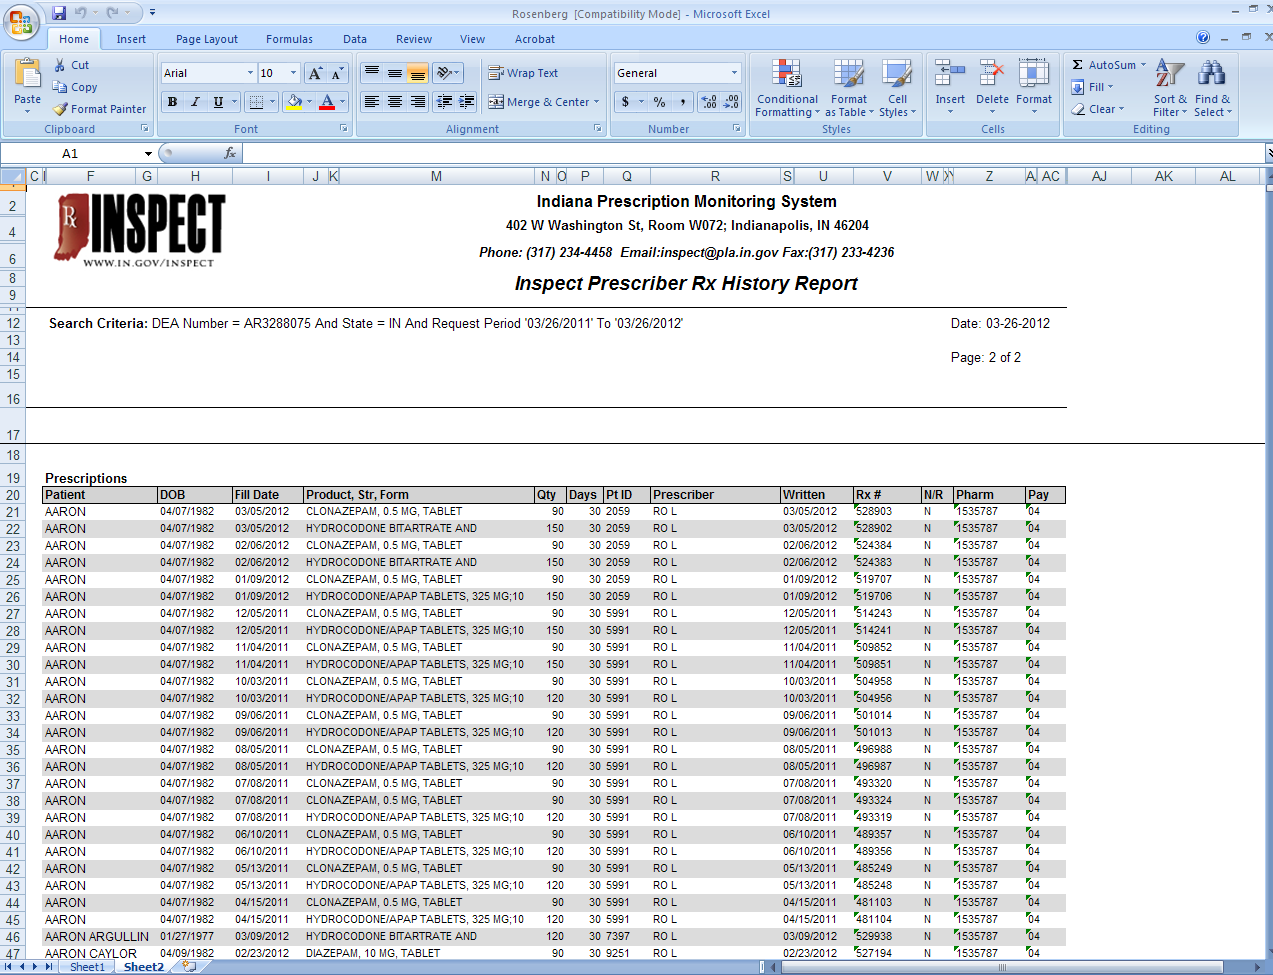 7. Your report will be returned to you as a Microsoft Excel spreadsheet.